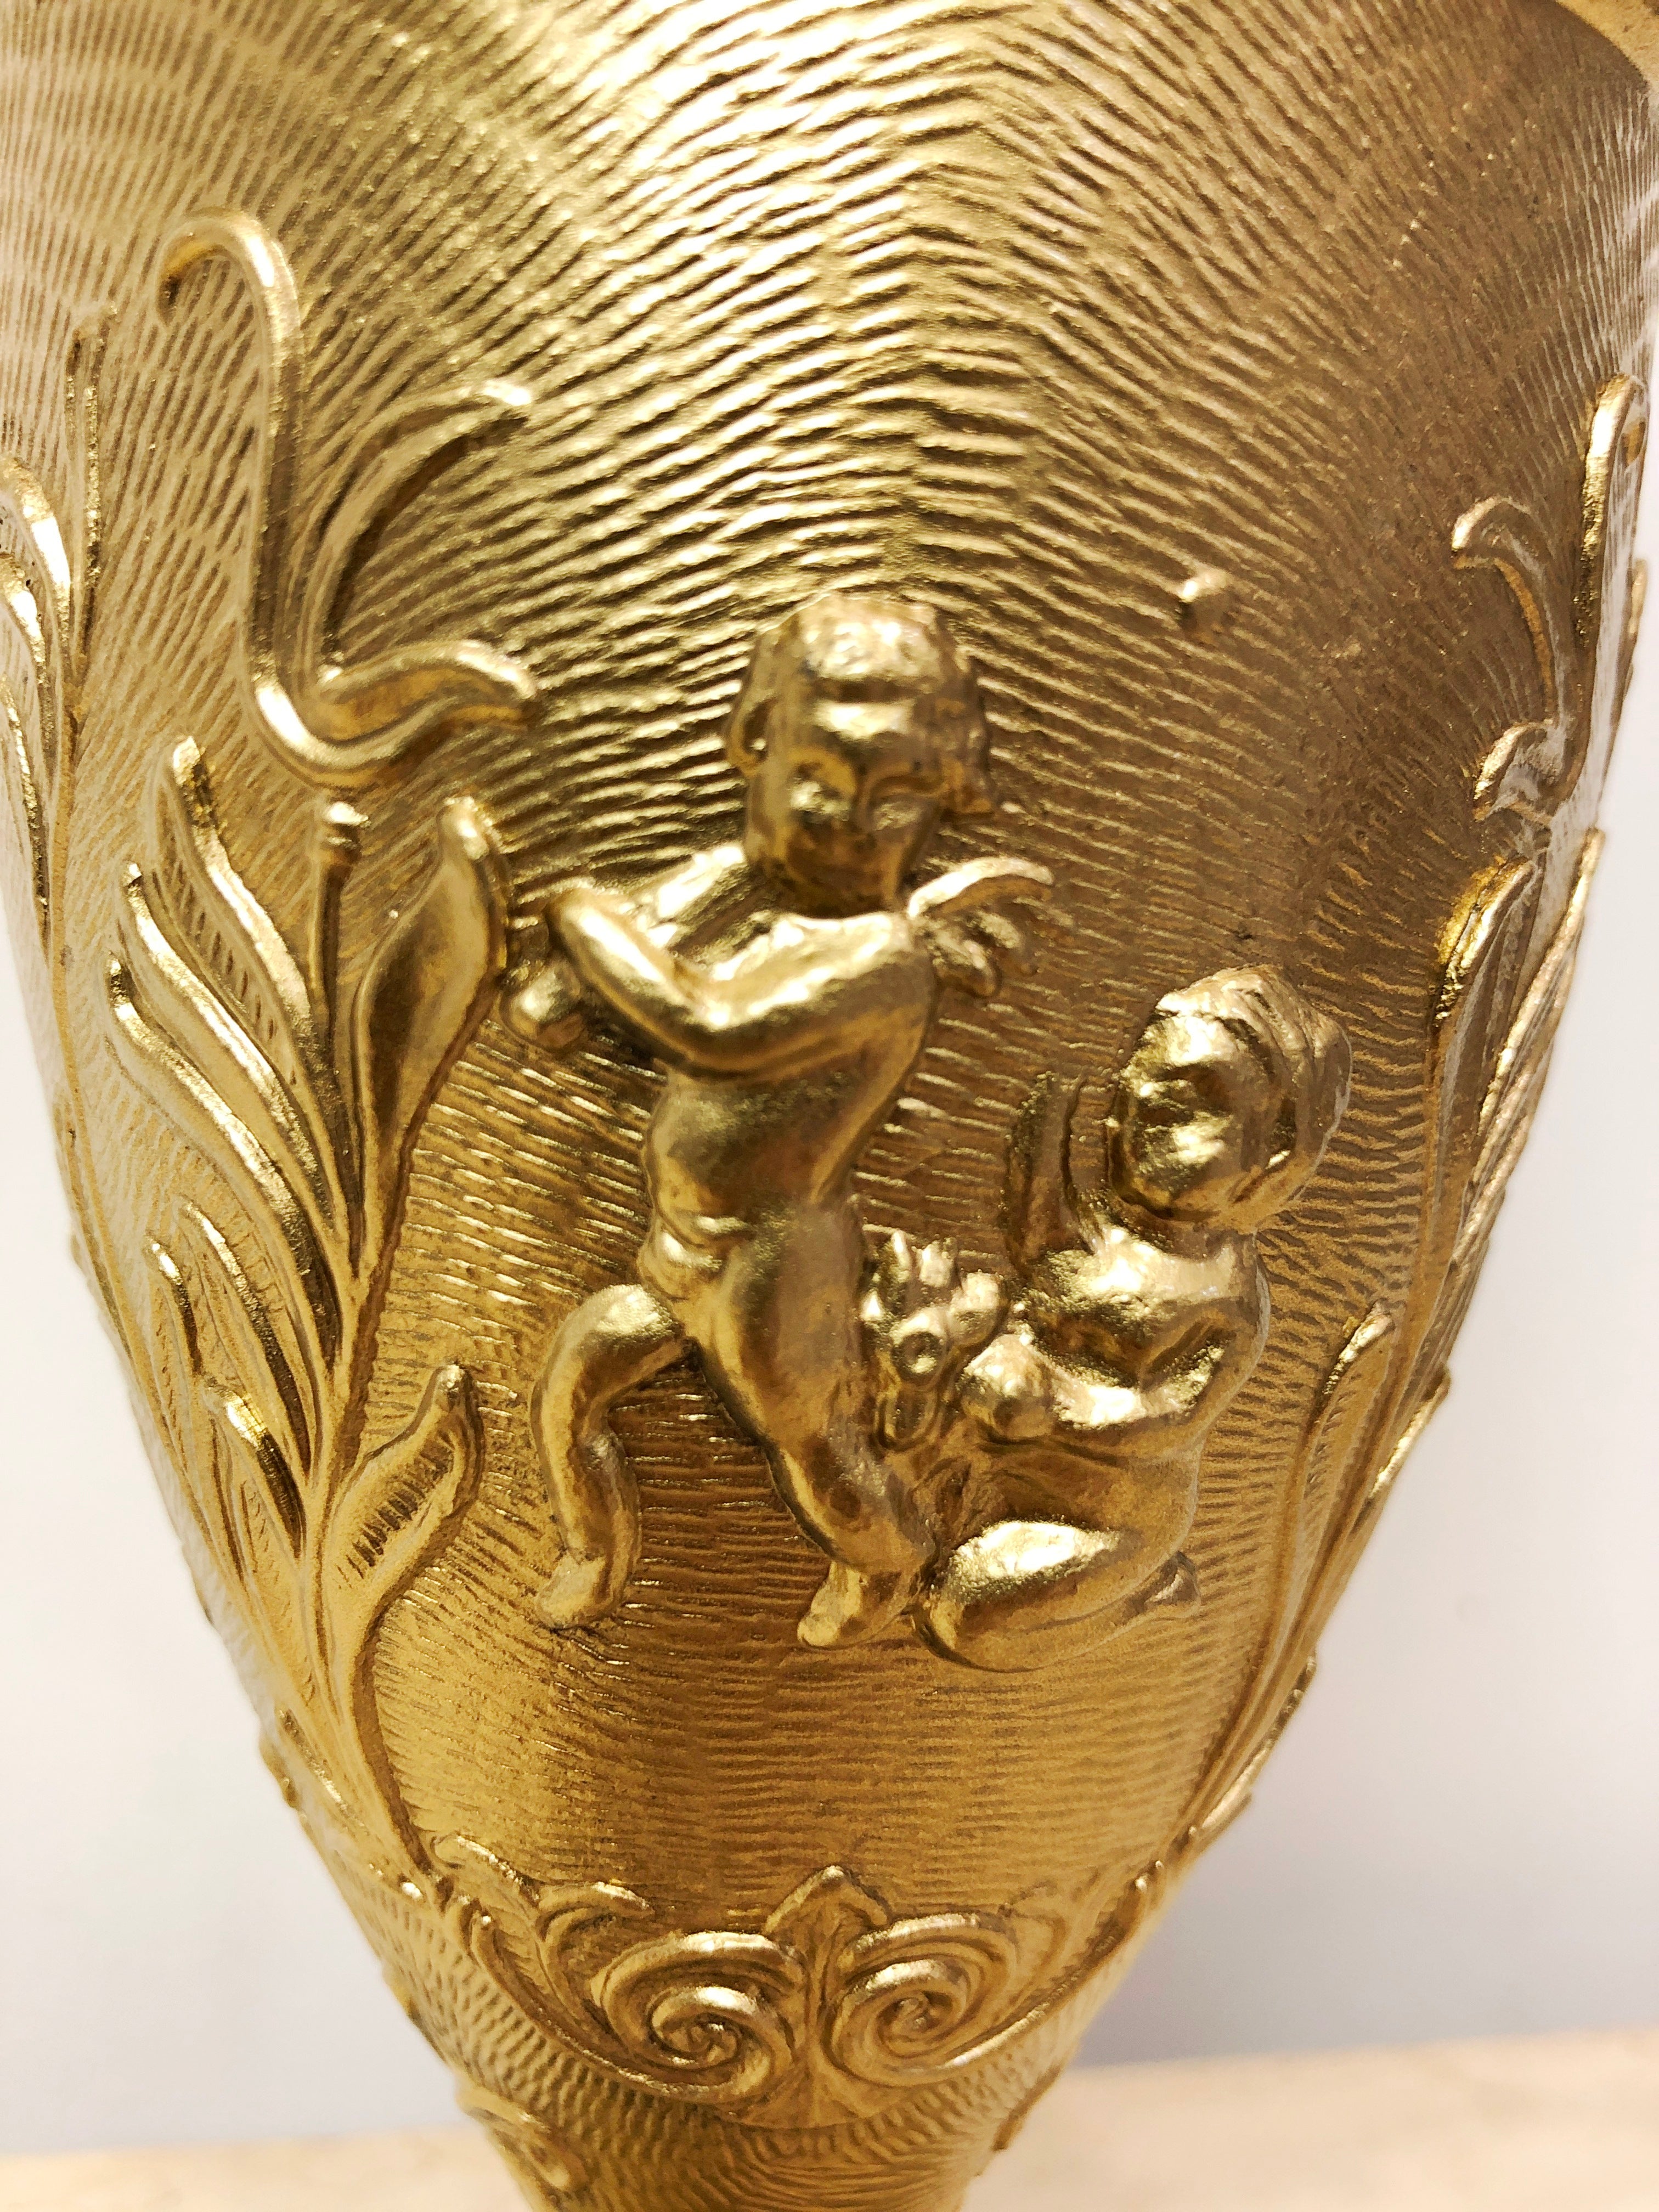 Vintage Italian Made Brass Double Handled Urn/Vase | eXibit collection